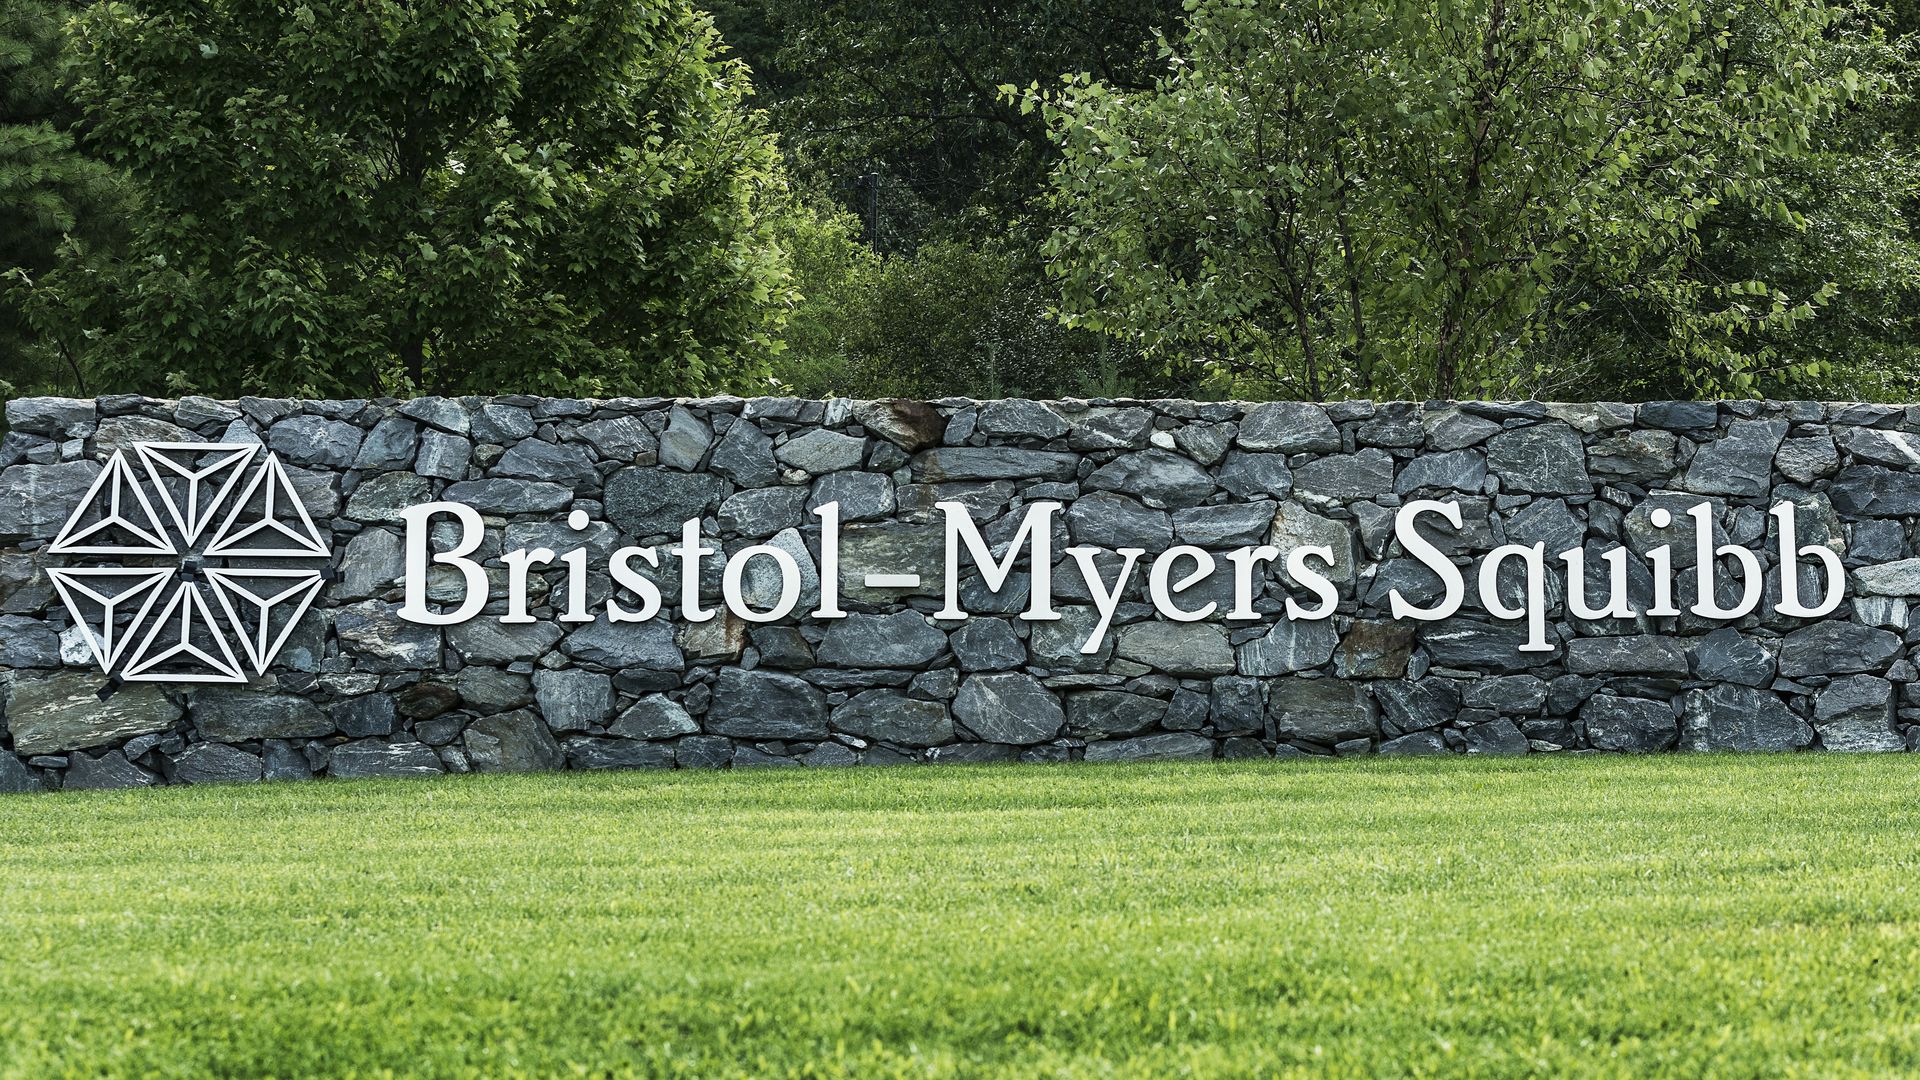 A sign with the Bristol-Myers Squibb logo